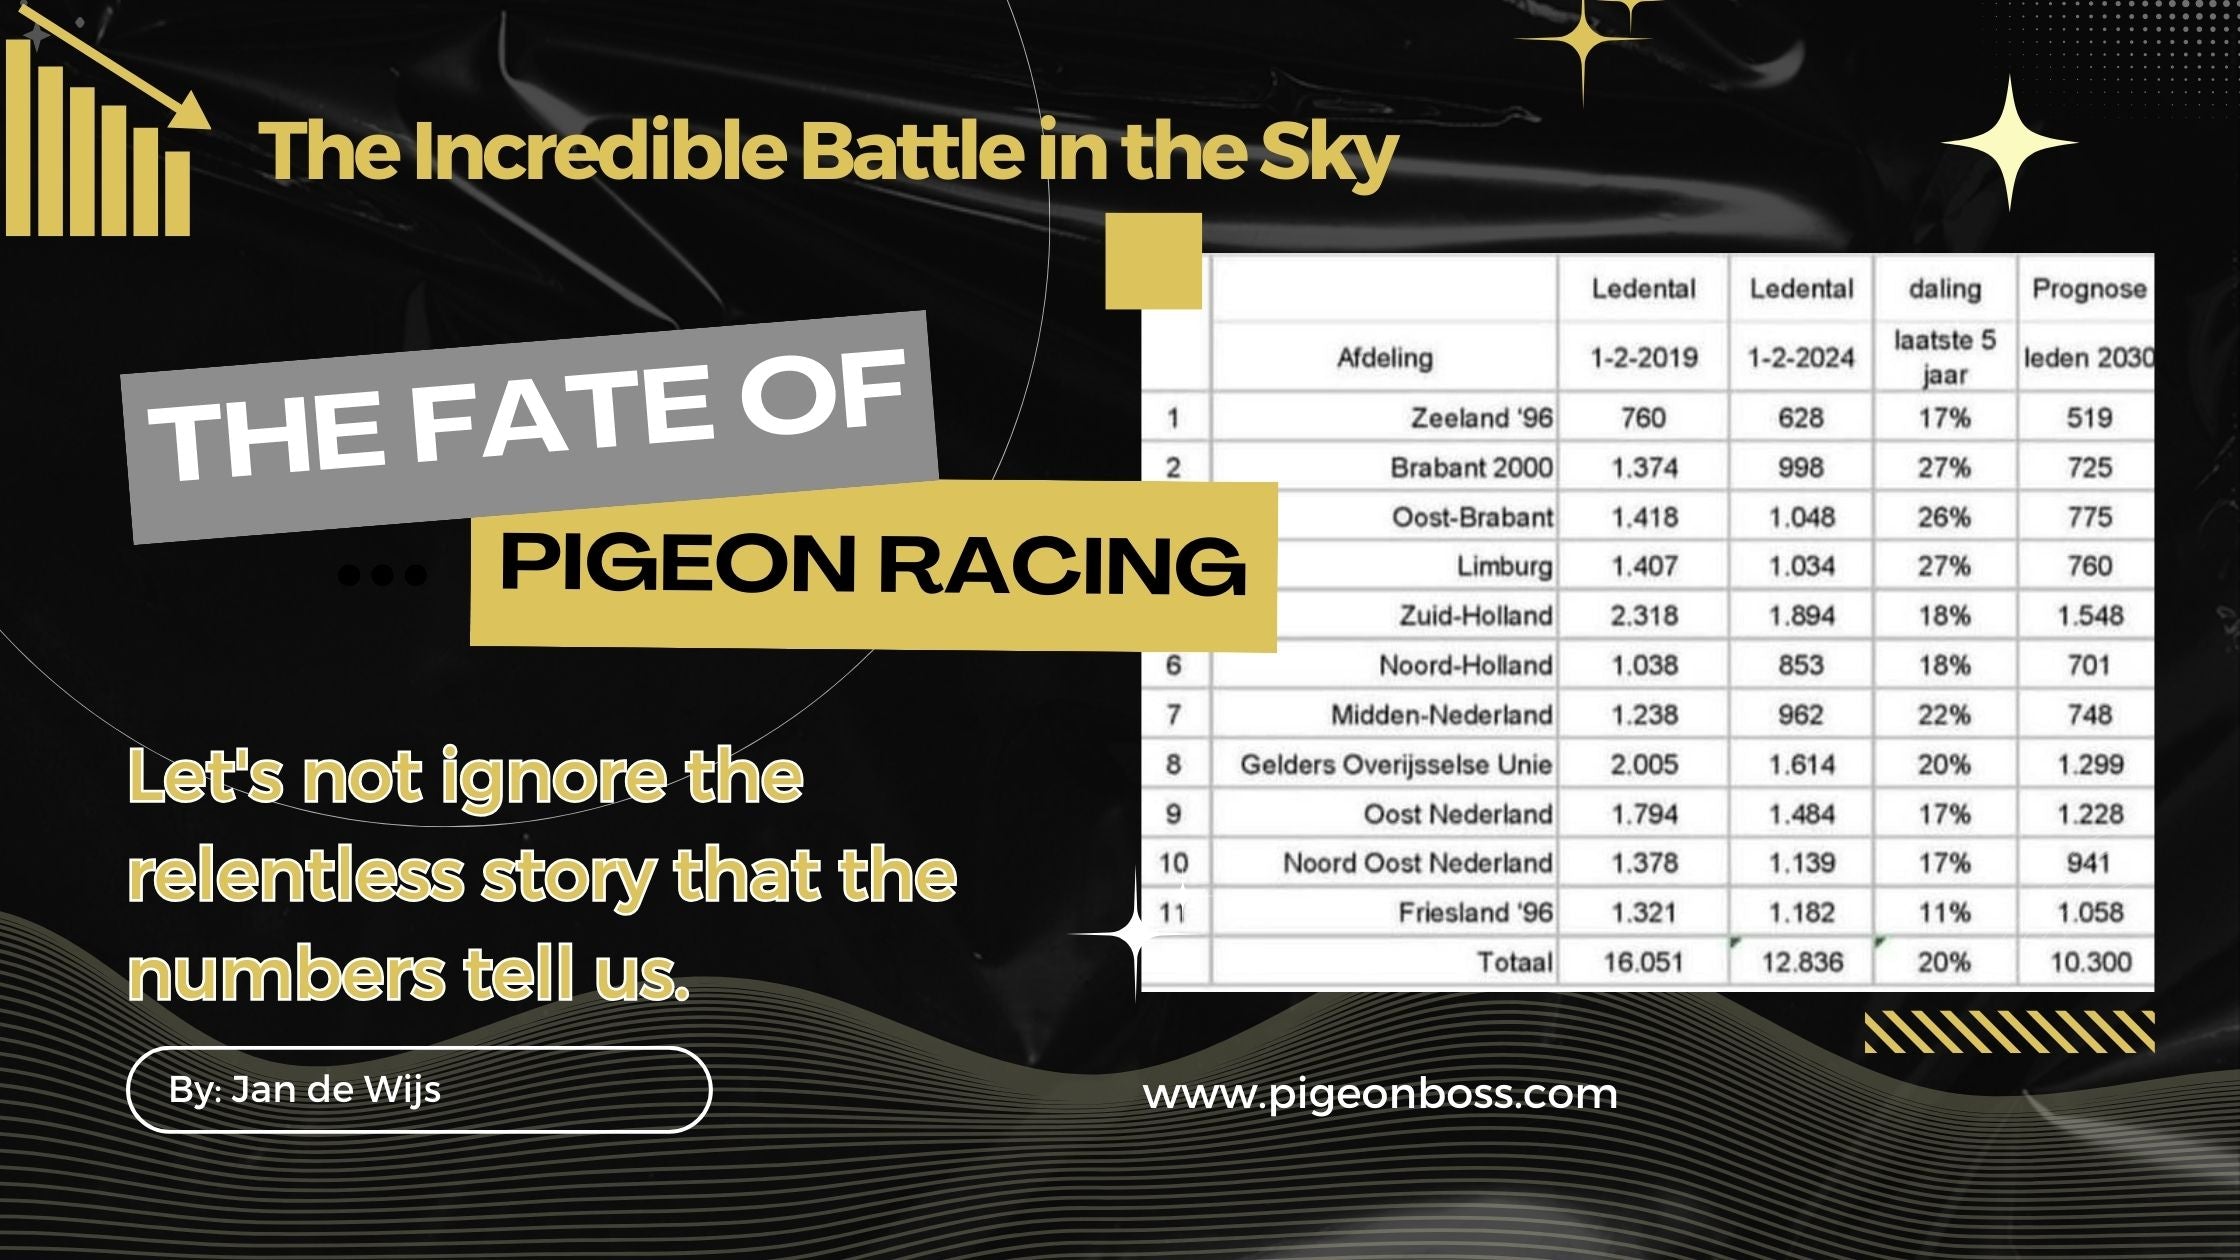 The Incredible Battle in the Sky: The Fate of Pigeon Racing